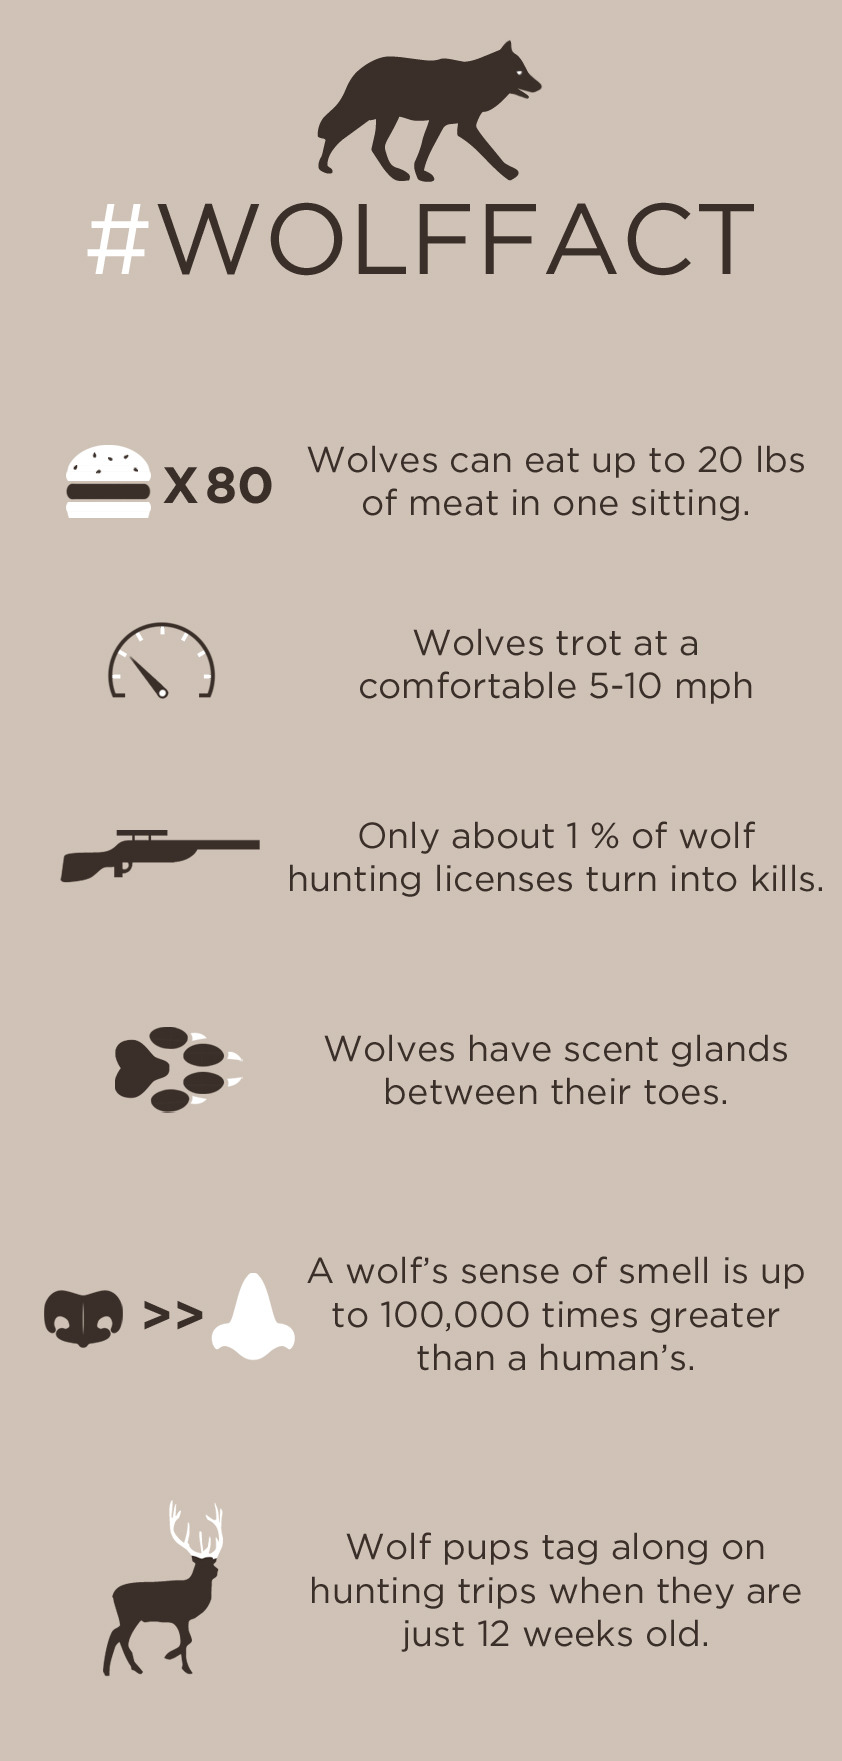 6 Easy Facts About Wolves - Amazing Facts About Animals